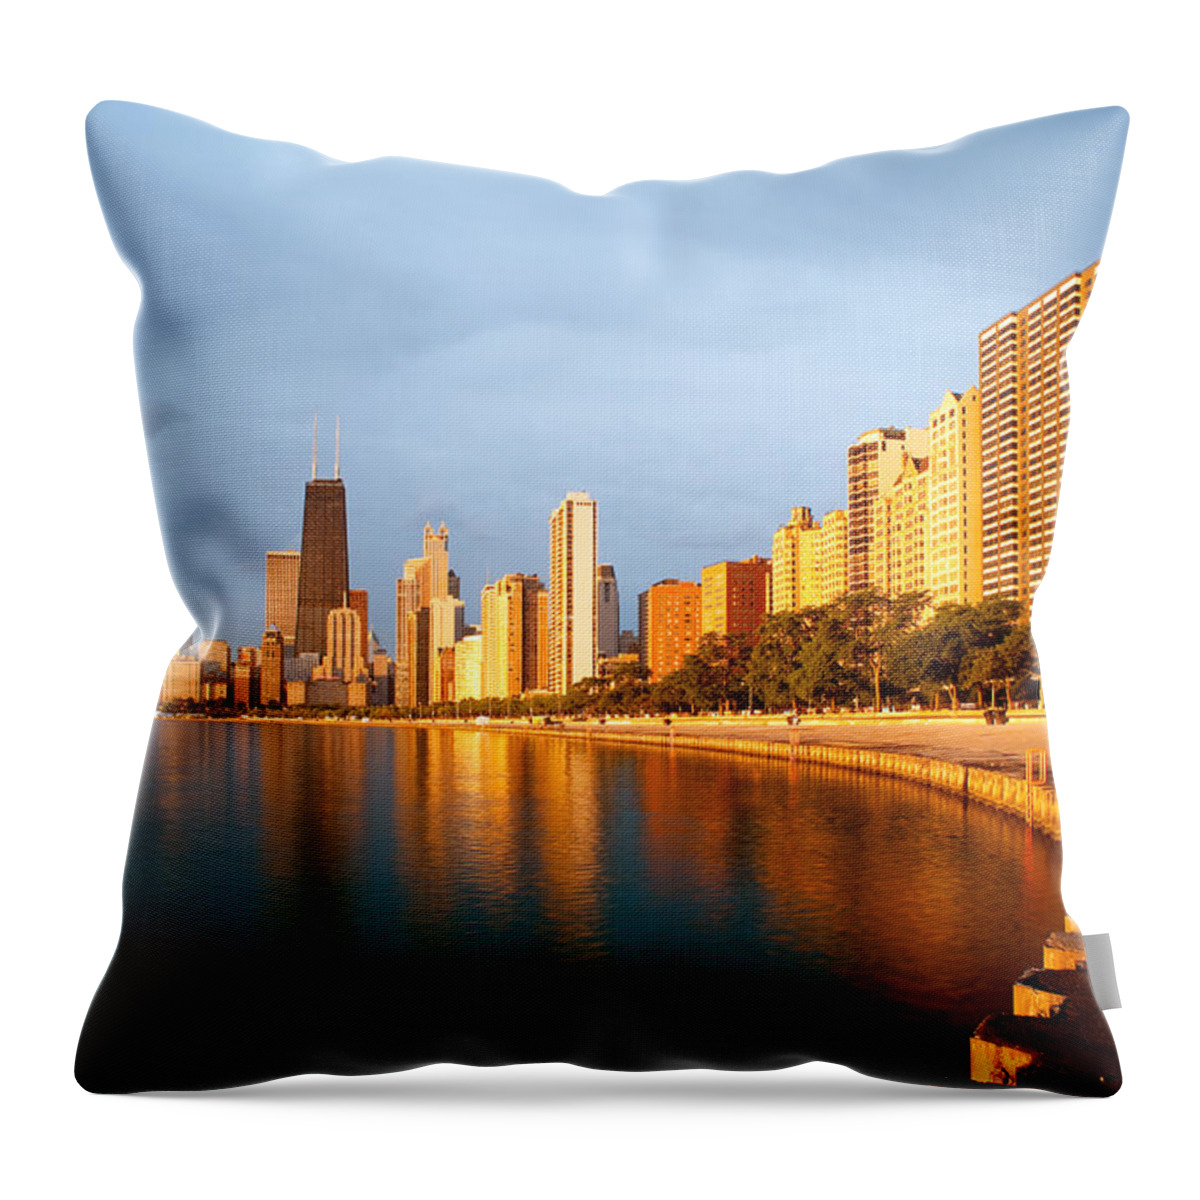 Chicago Throw Pillow featuring the photograph Chicago Skyline by Sebastian Musial